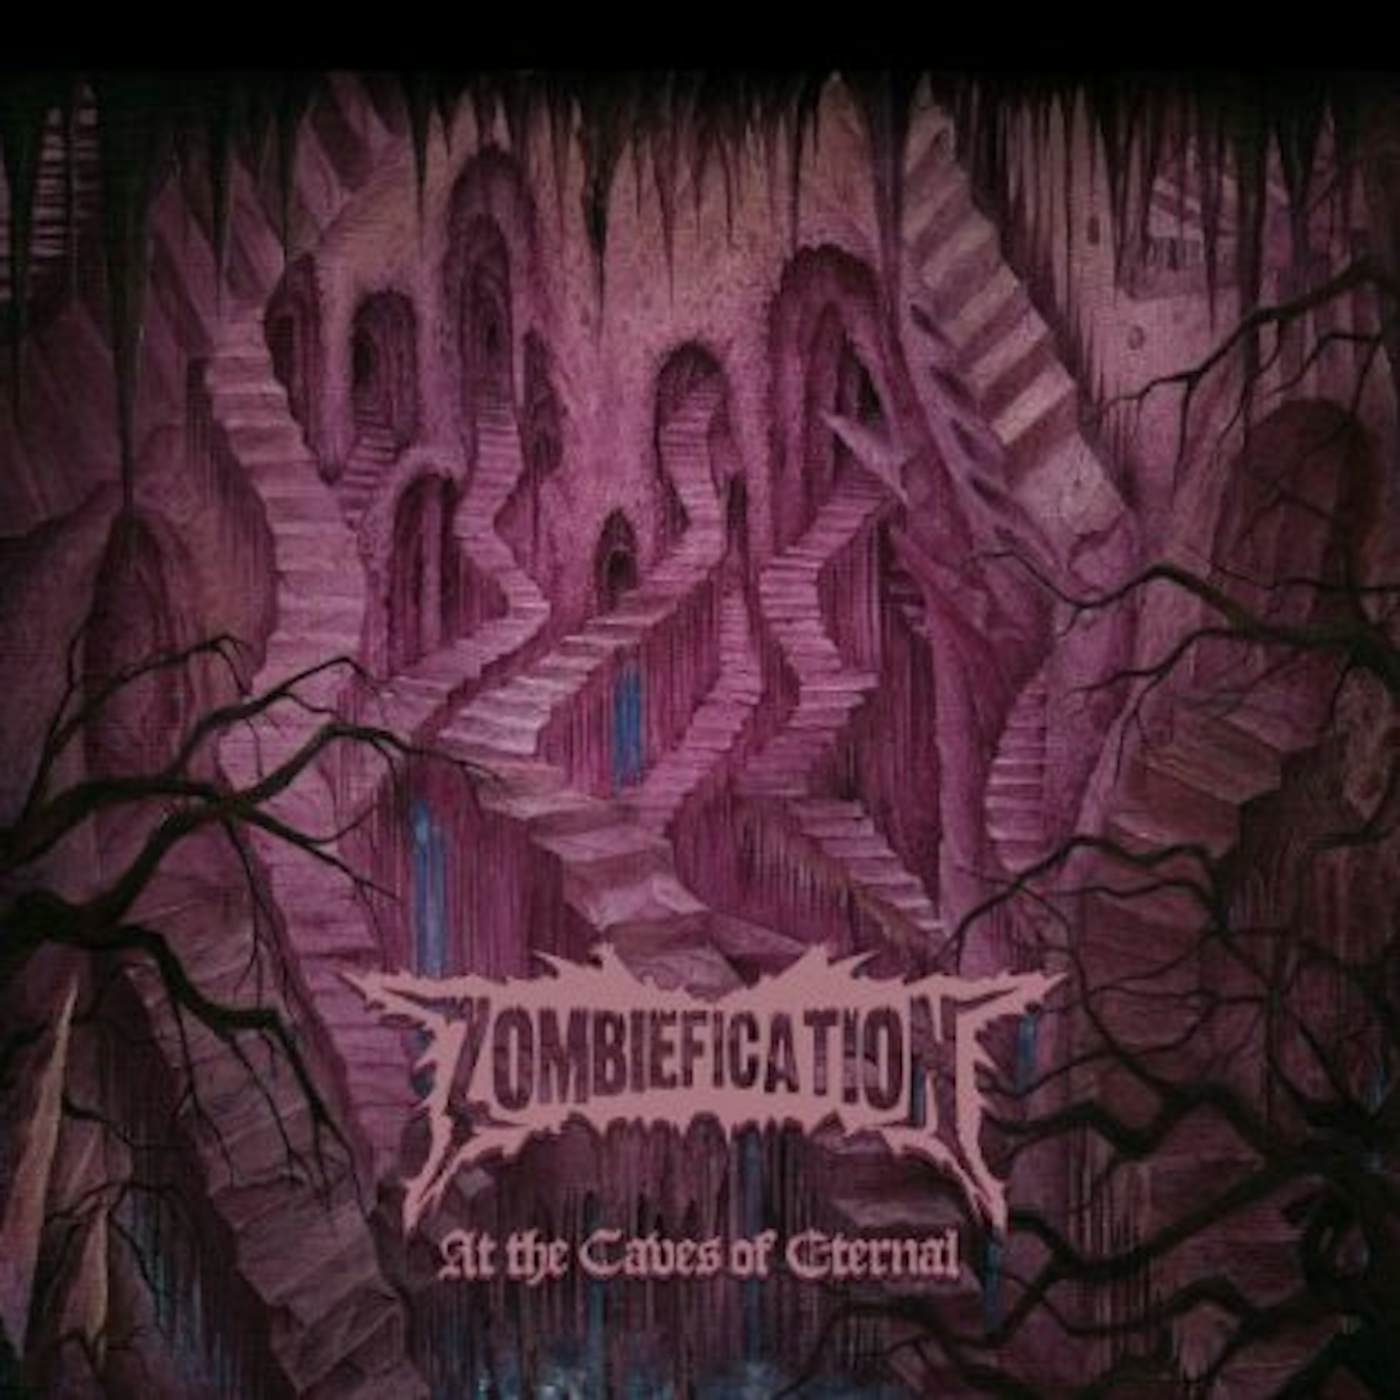 Zombiefication AT THE CAVES OF ETERNAL CD